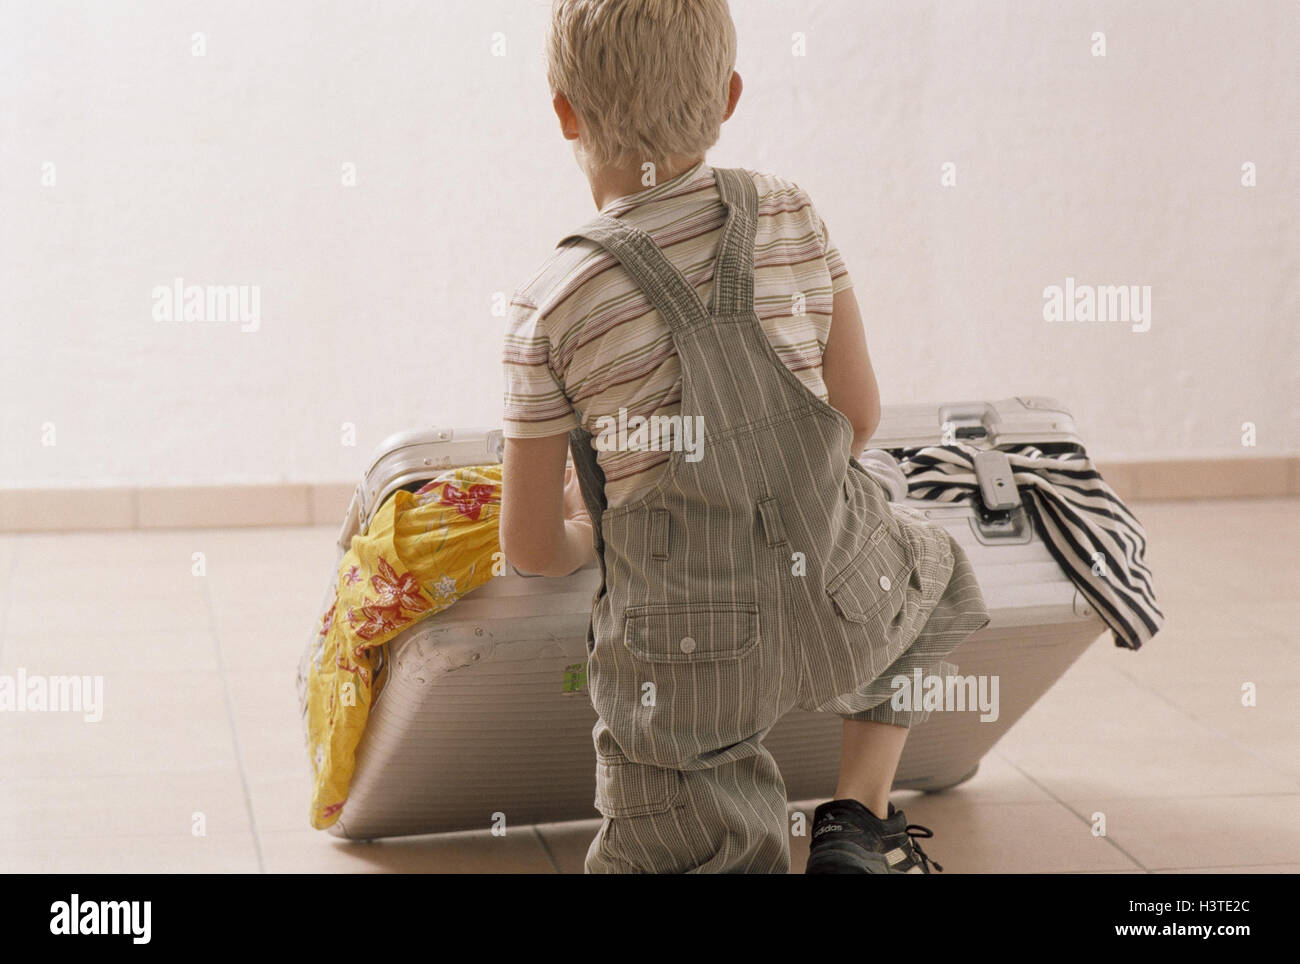 Boy, suitcases pack, back view, go away inside, child, to suitcase stacks, to travel, suitcase, luggage, overcrowds, completely, clothes, clothes pieces, pack, lonely, only, vacation, holidays, prejoy, independence Stock Photo